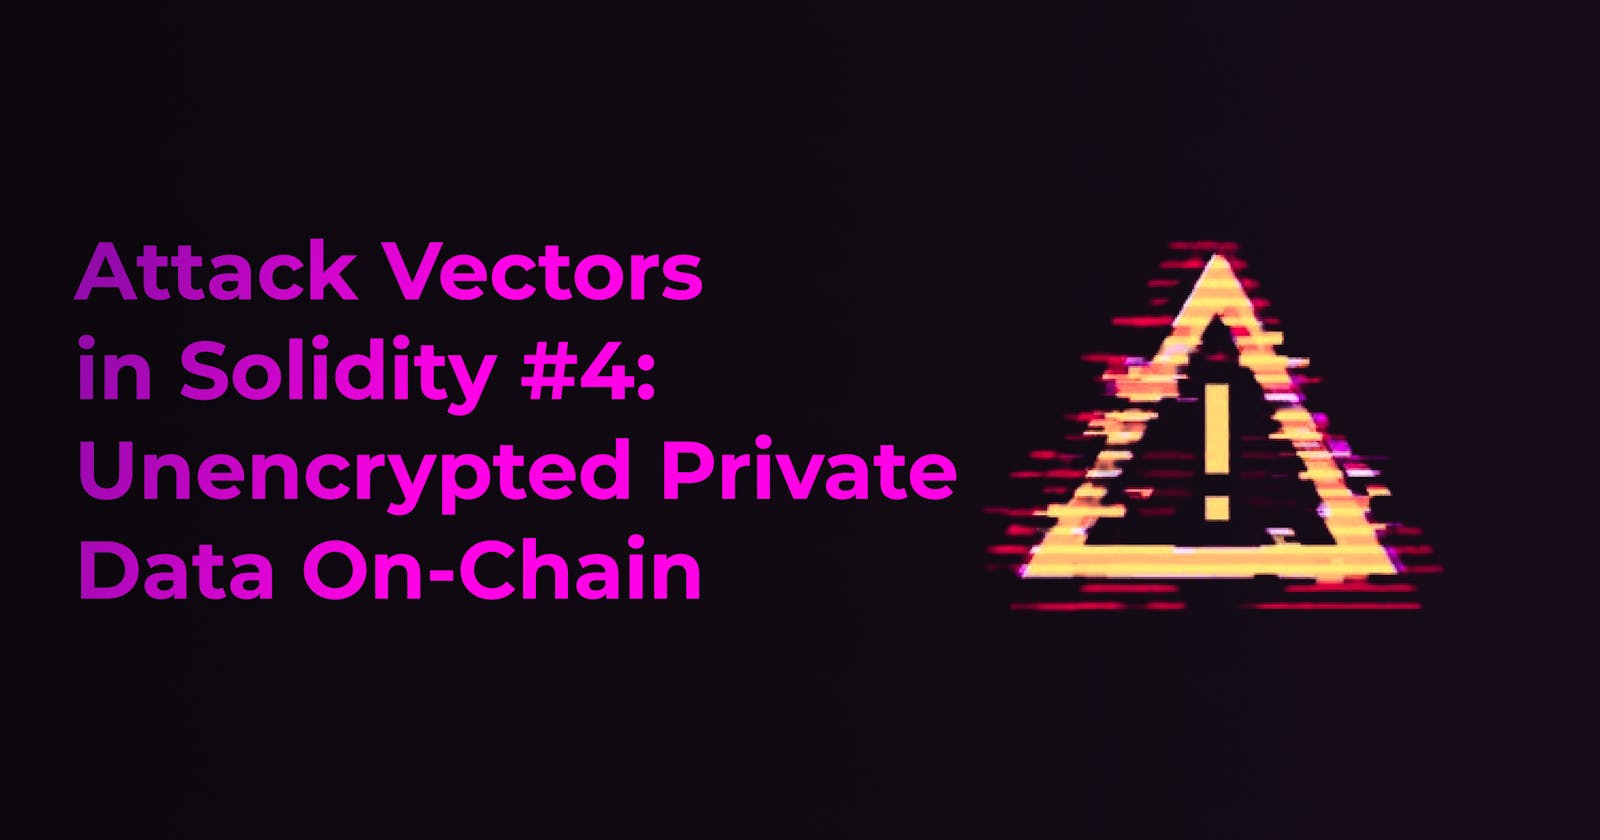 Attack Vectors in Solidity #4: Unencrypted Private Data On-Chain